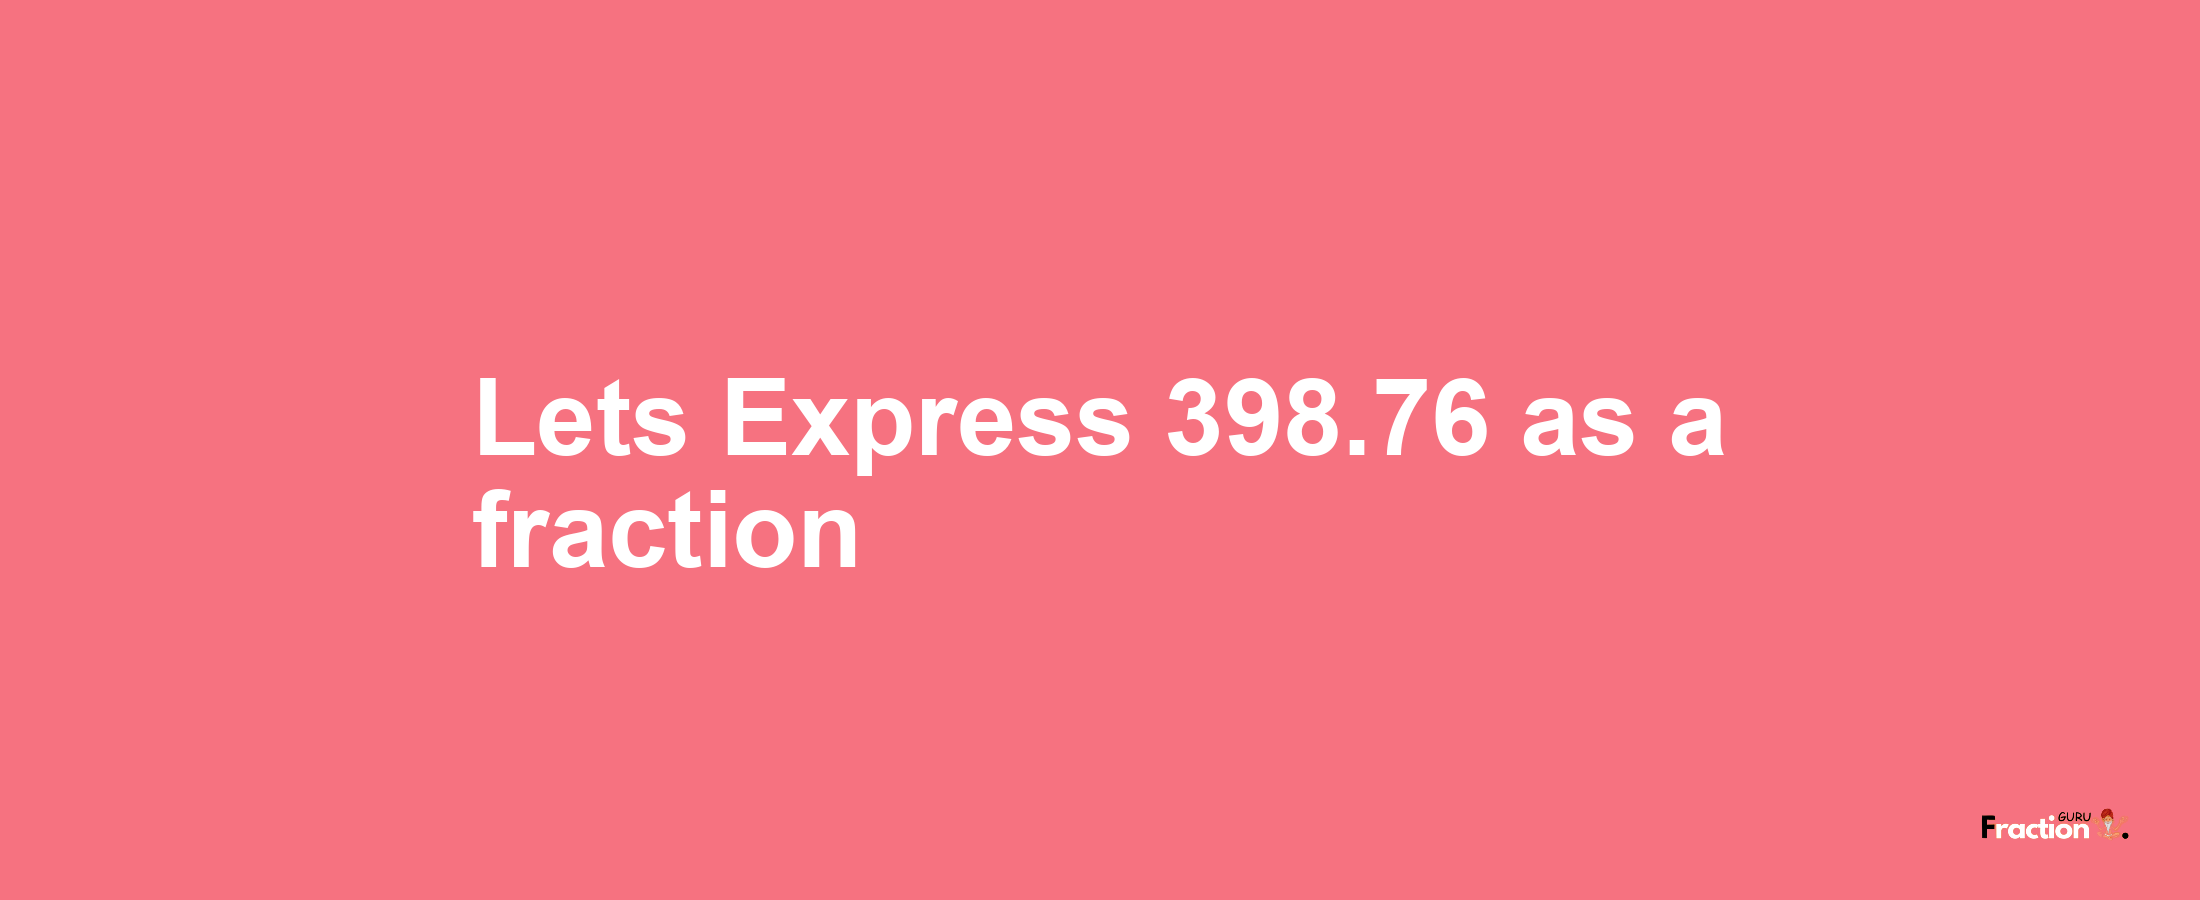 Lets Express 398.76 as afraction